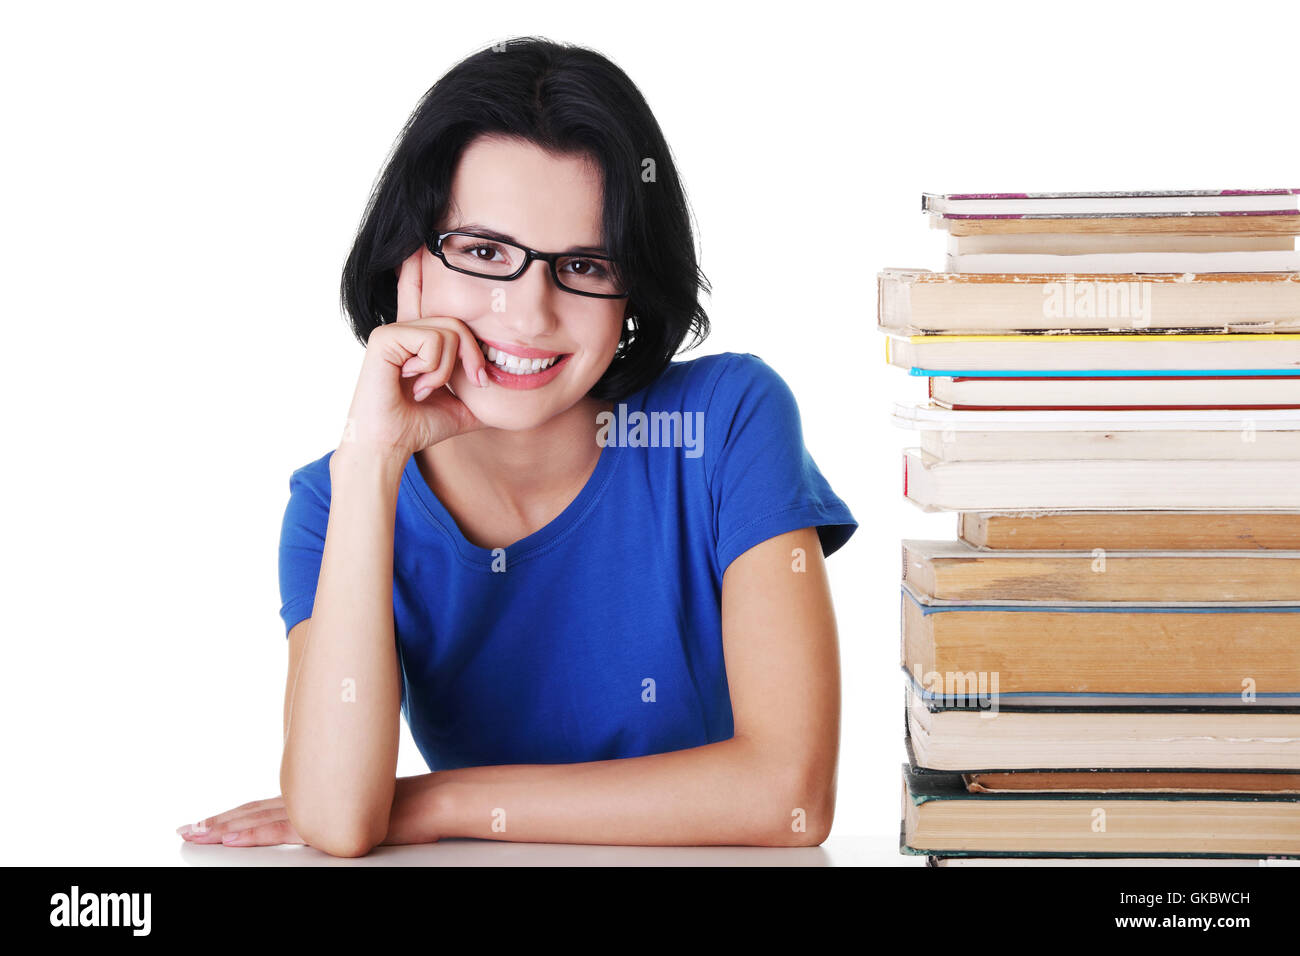 study humans human beings Stock Photo